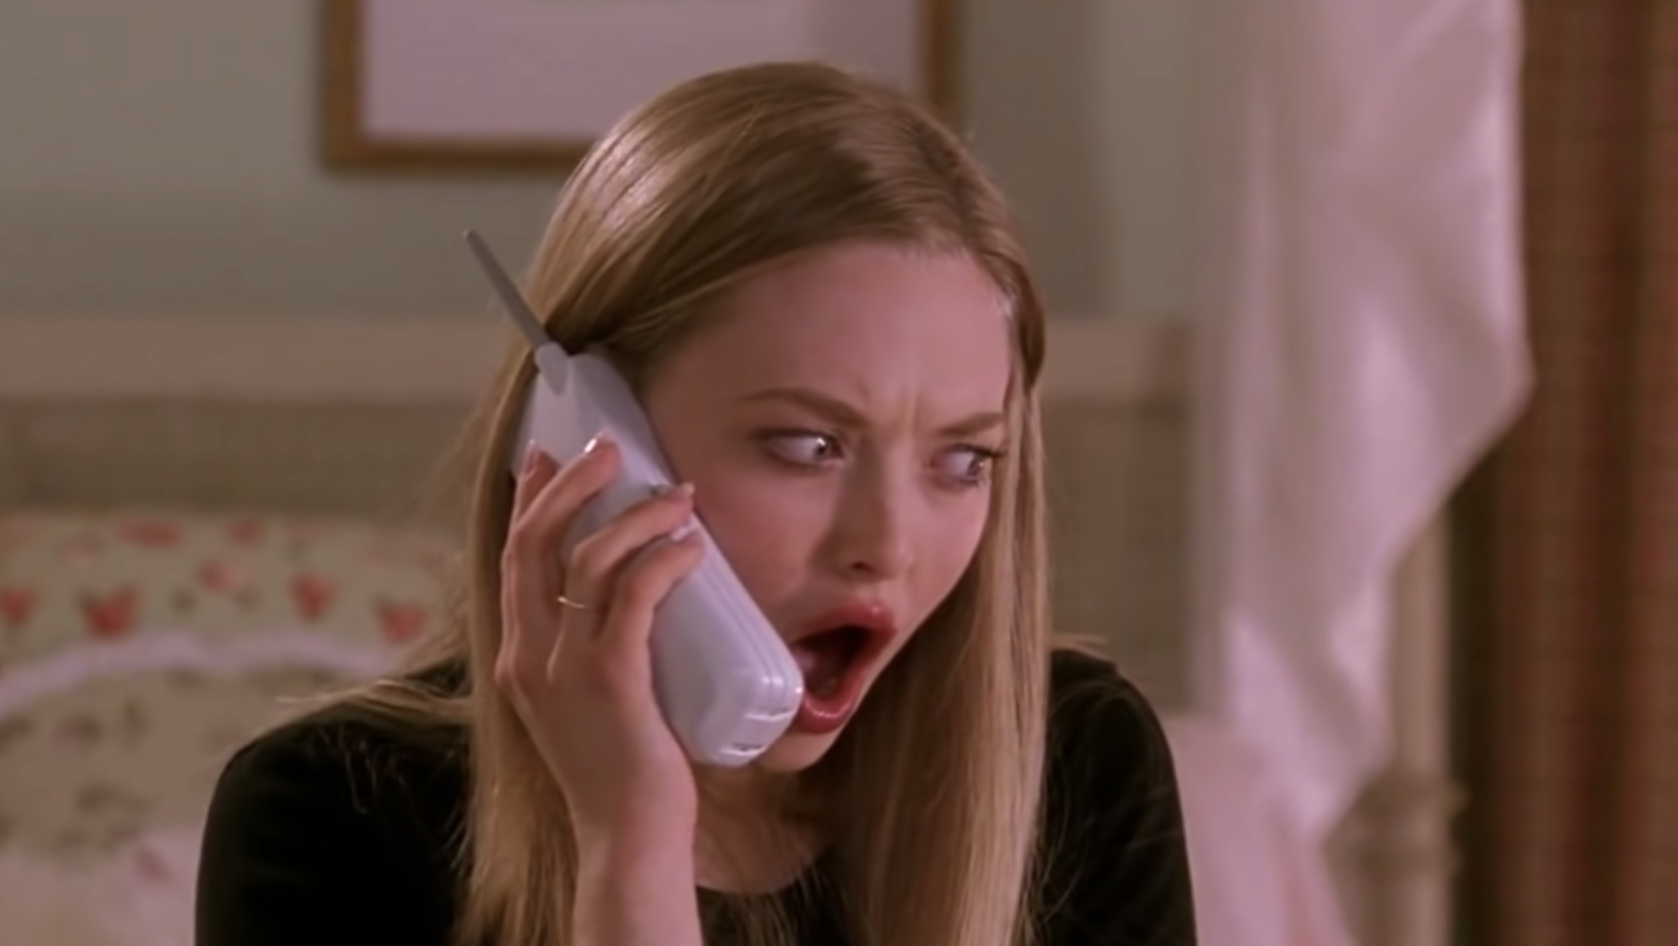 Karen looking shocked and offended on the phone in mean girls